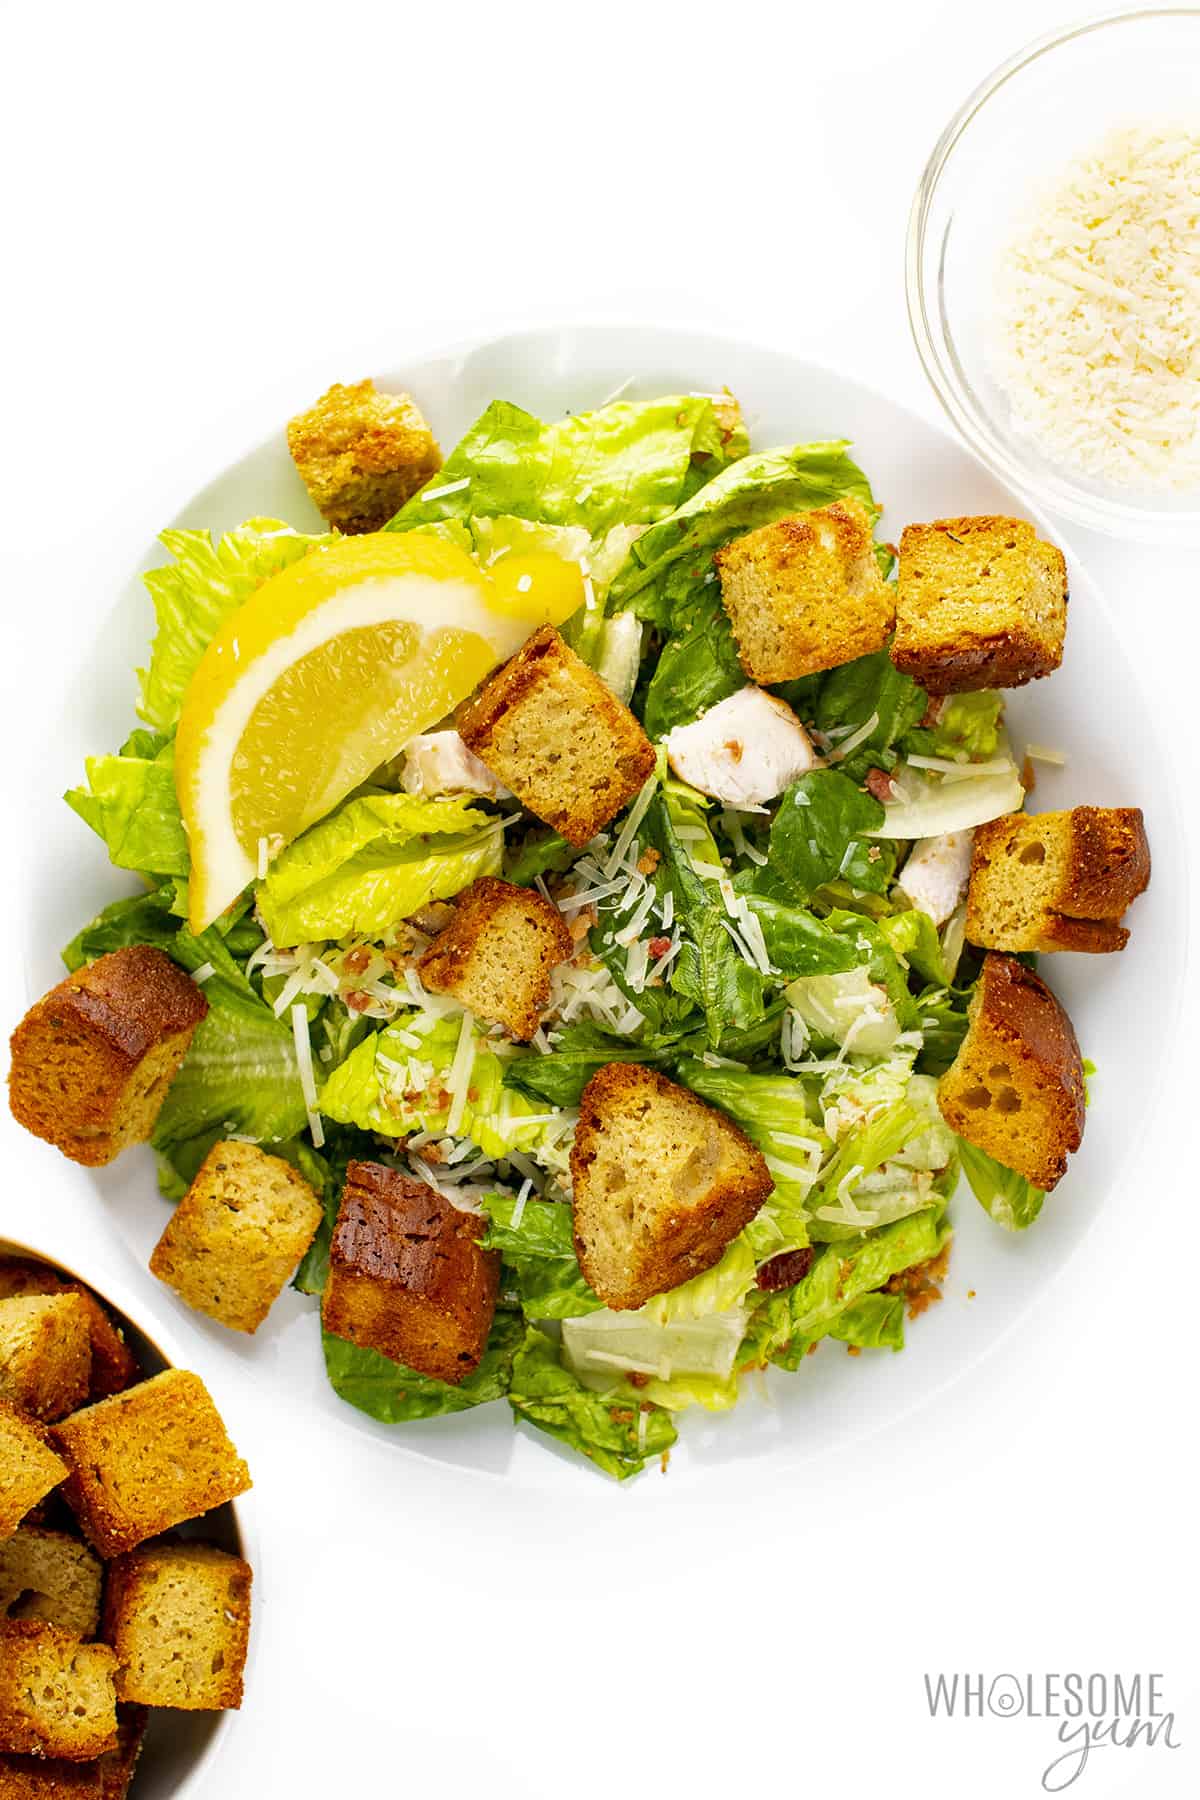 Salad topped with keto croutons